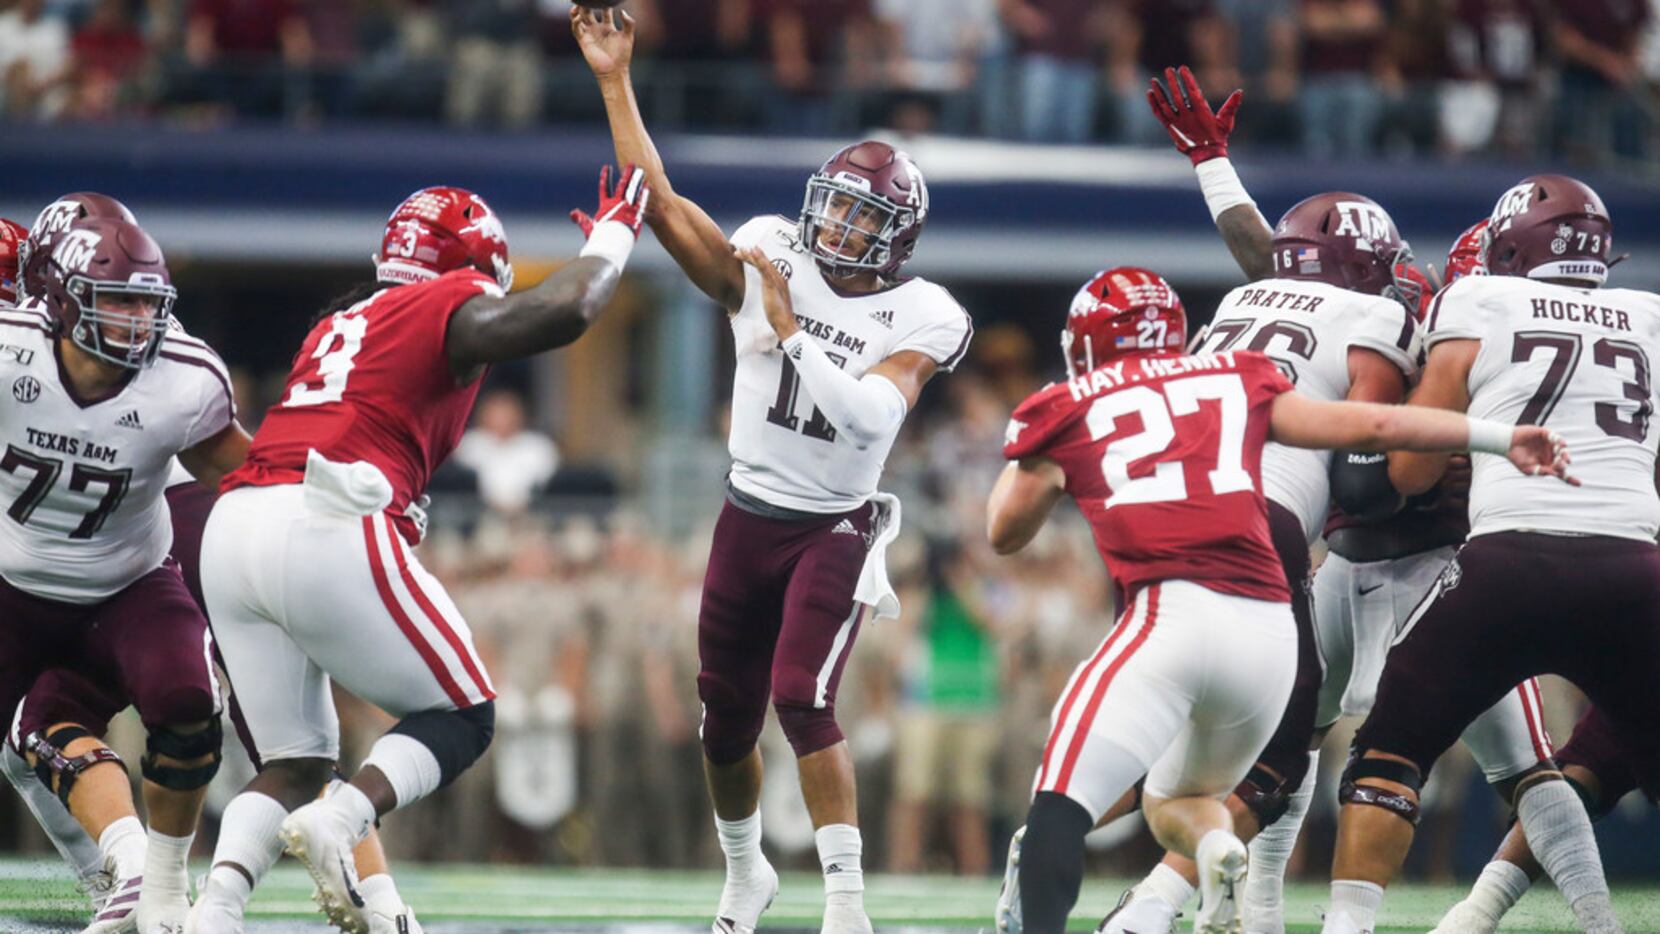 College football picks (Week 9): Predictions for A&M-Arkansas, TCU-Baylor,  Oklahoma St-Texas and more